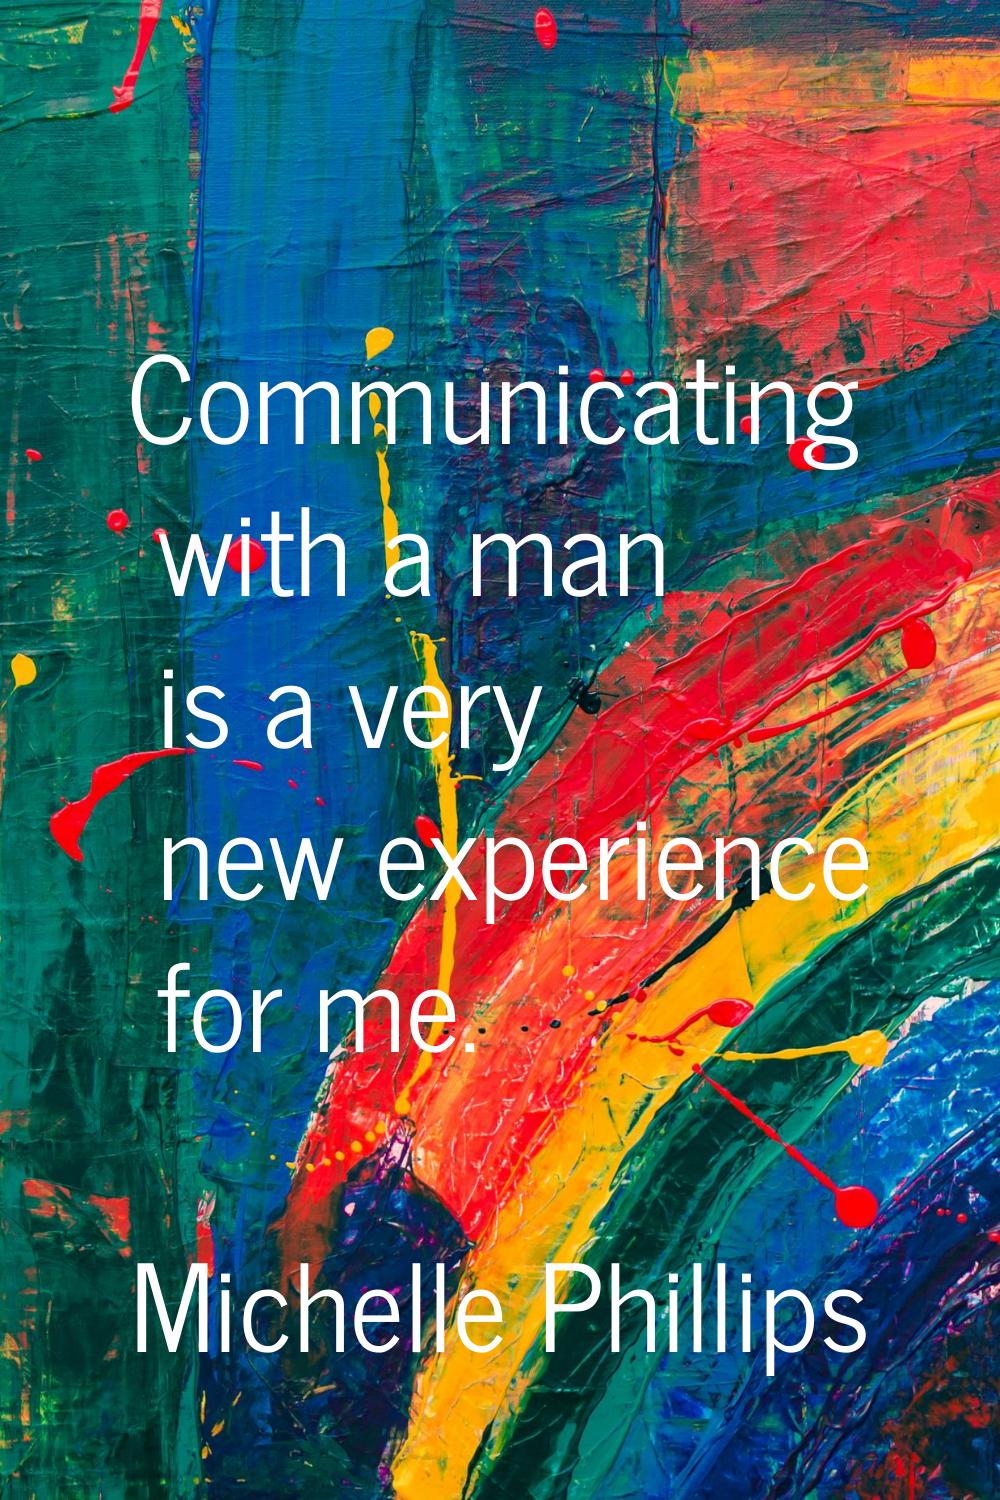 Communicating with a man is a very new experience for me.